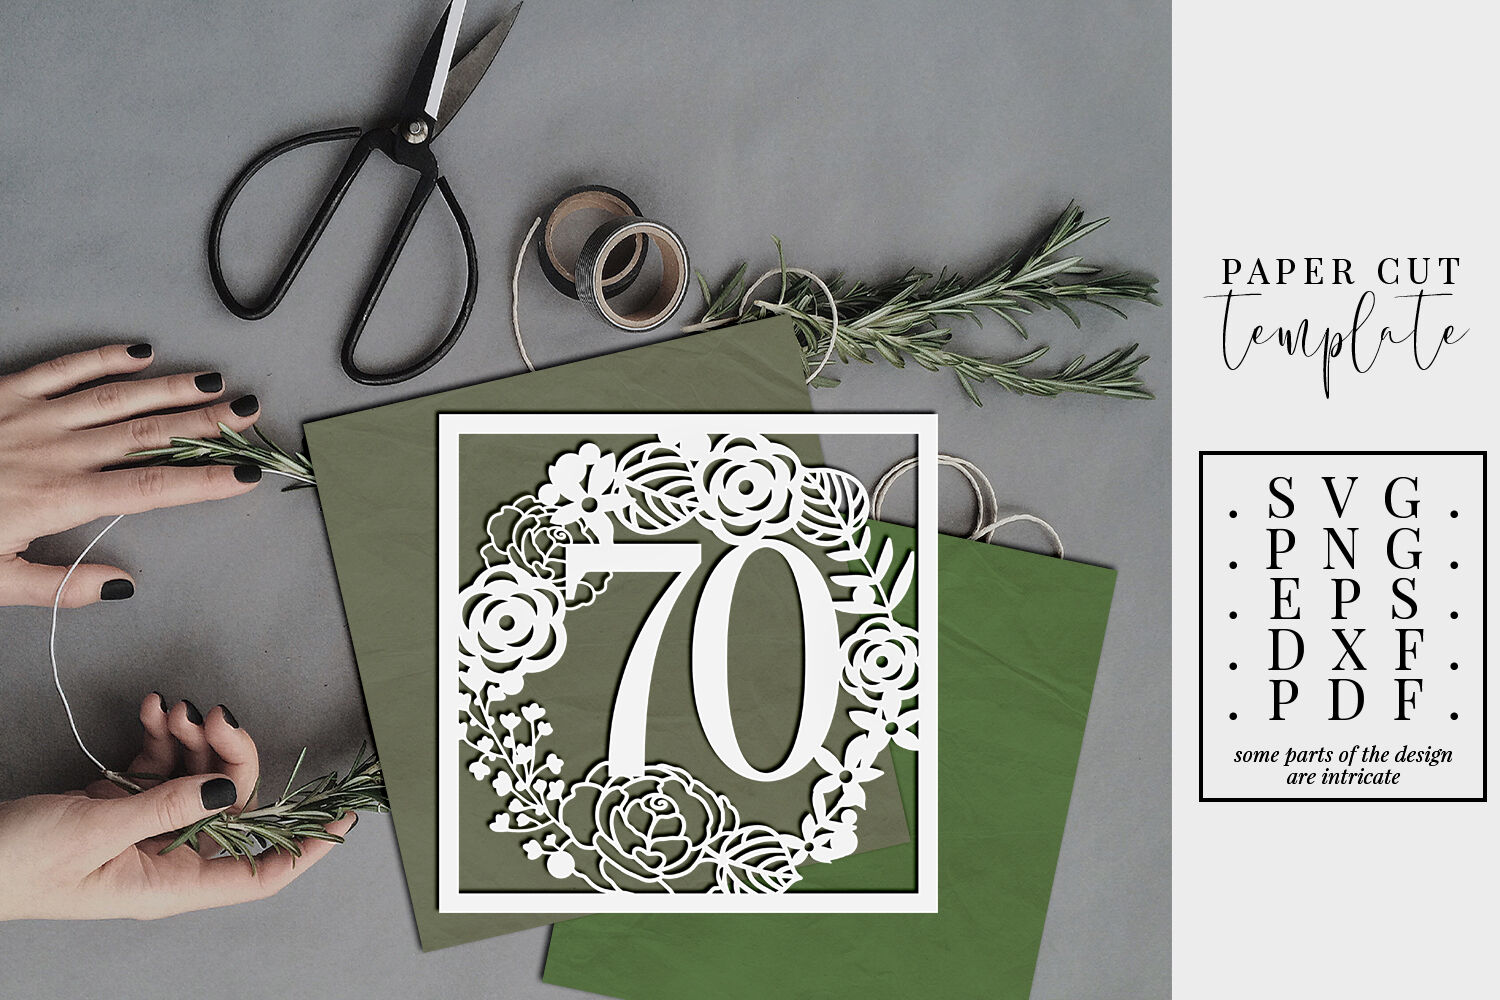 Download 70 Birthday Square Papercut Template, 70th Birthday, SVG ...